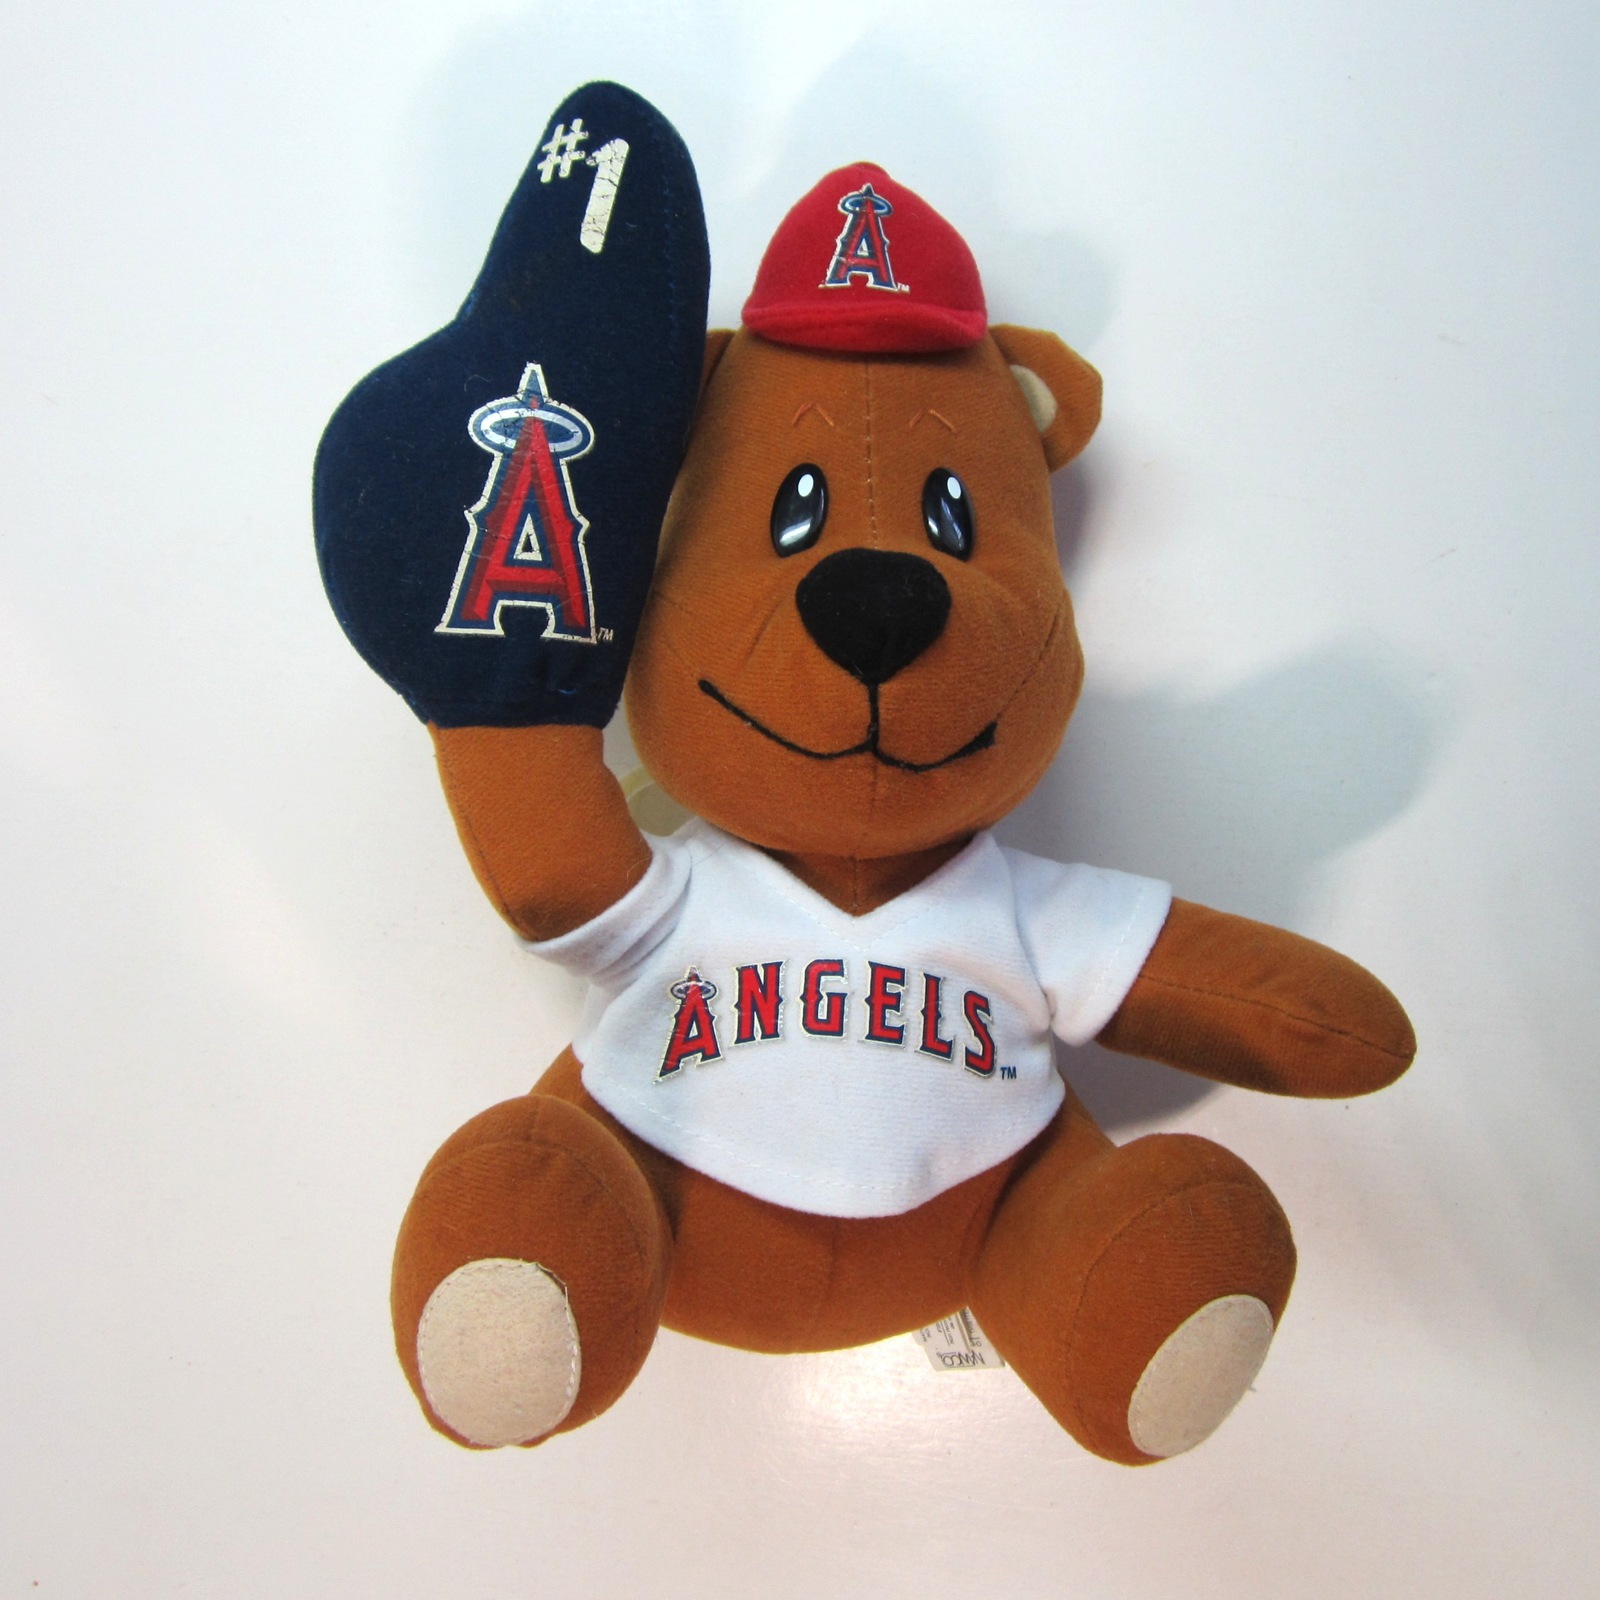 Primary image for  Los Angeles ANGELS of Anaheim MLB Plush Bear Wearing No. 1 Rally Glove by NANCO